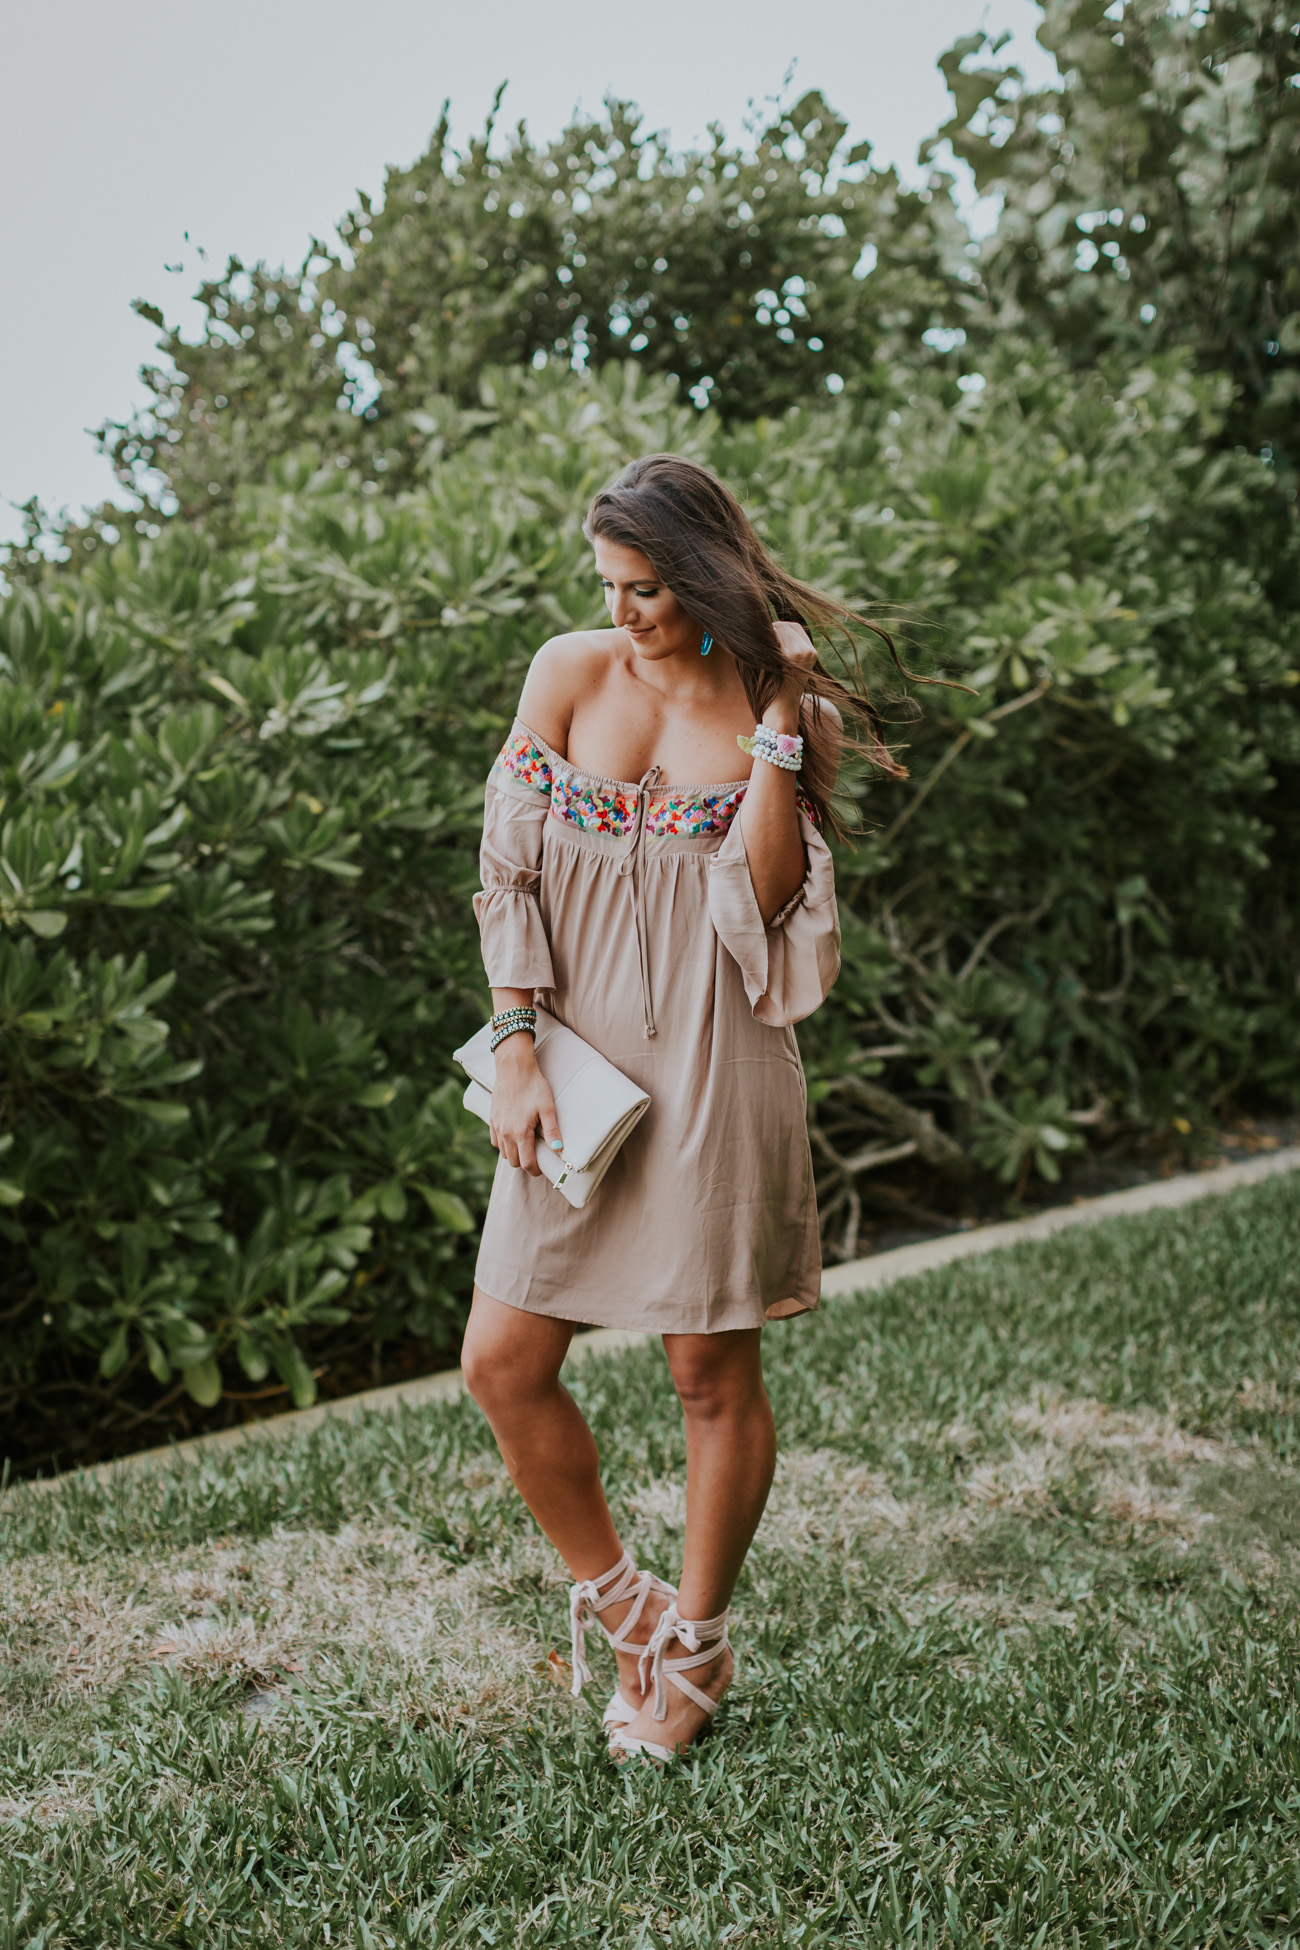 embroidered off the shoulder dress, vava by joy han dress, beach style, beach fashion, ruffle sleeves, tassel bracelets, turquoise jewelry // grace wainwright a southern drawl